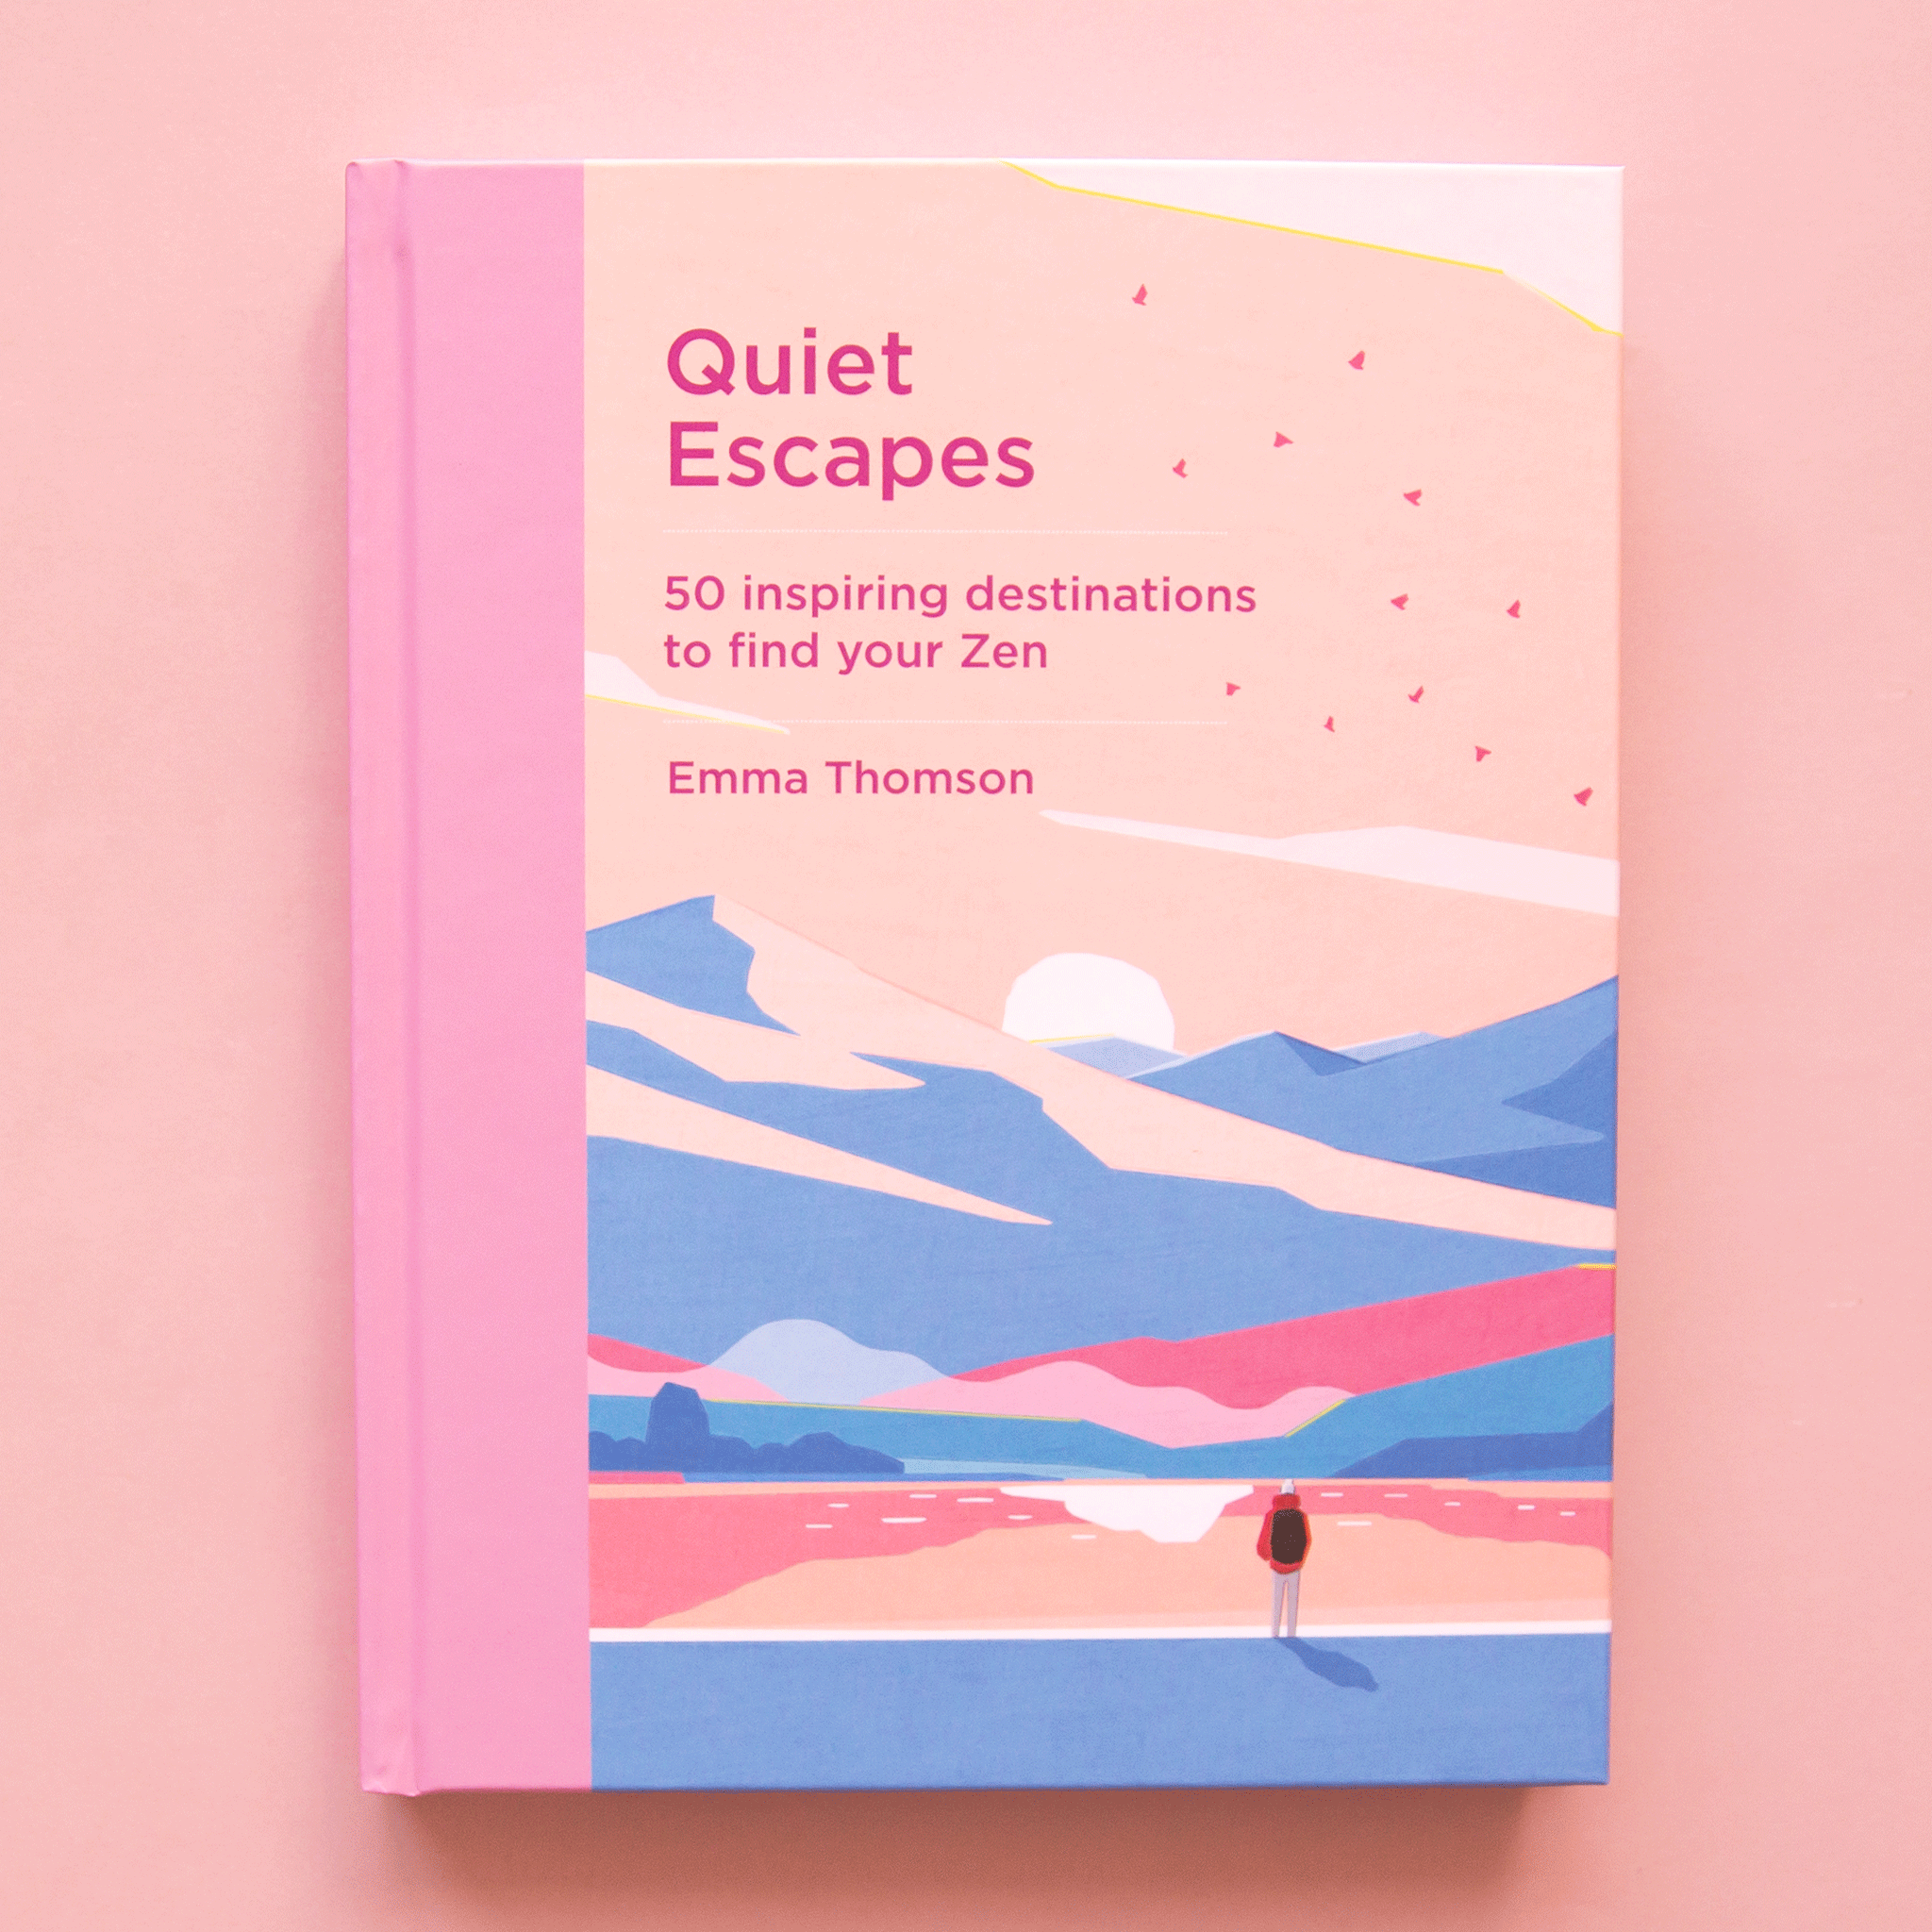 On a peach background is a book with a blue, pink and tan book cover with a mountainous landscape graphic and a title that reads, "Quiet Escapes 50 inspiring destinations to find your Zen". 